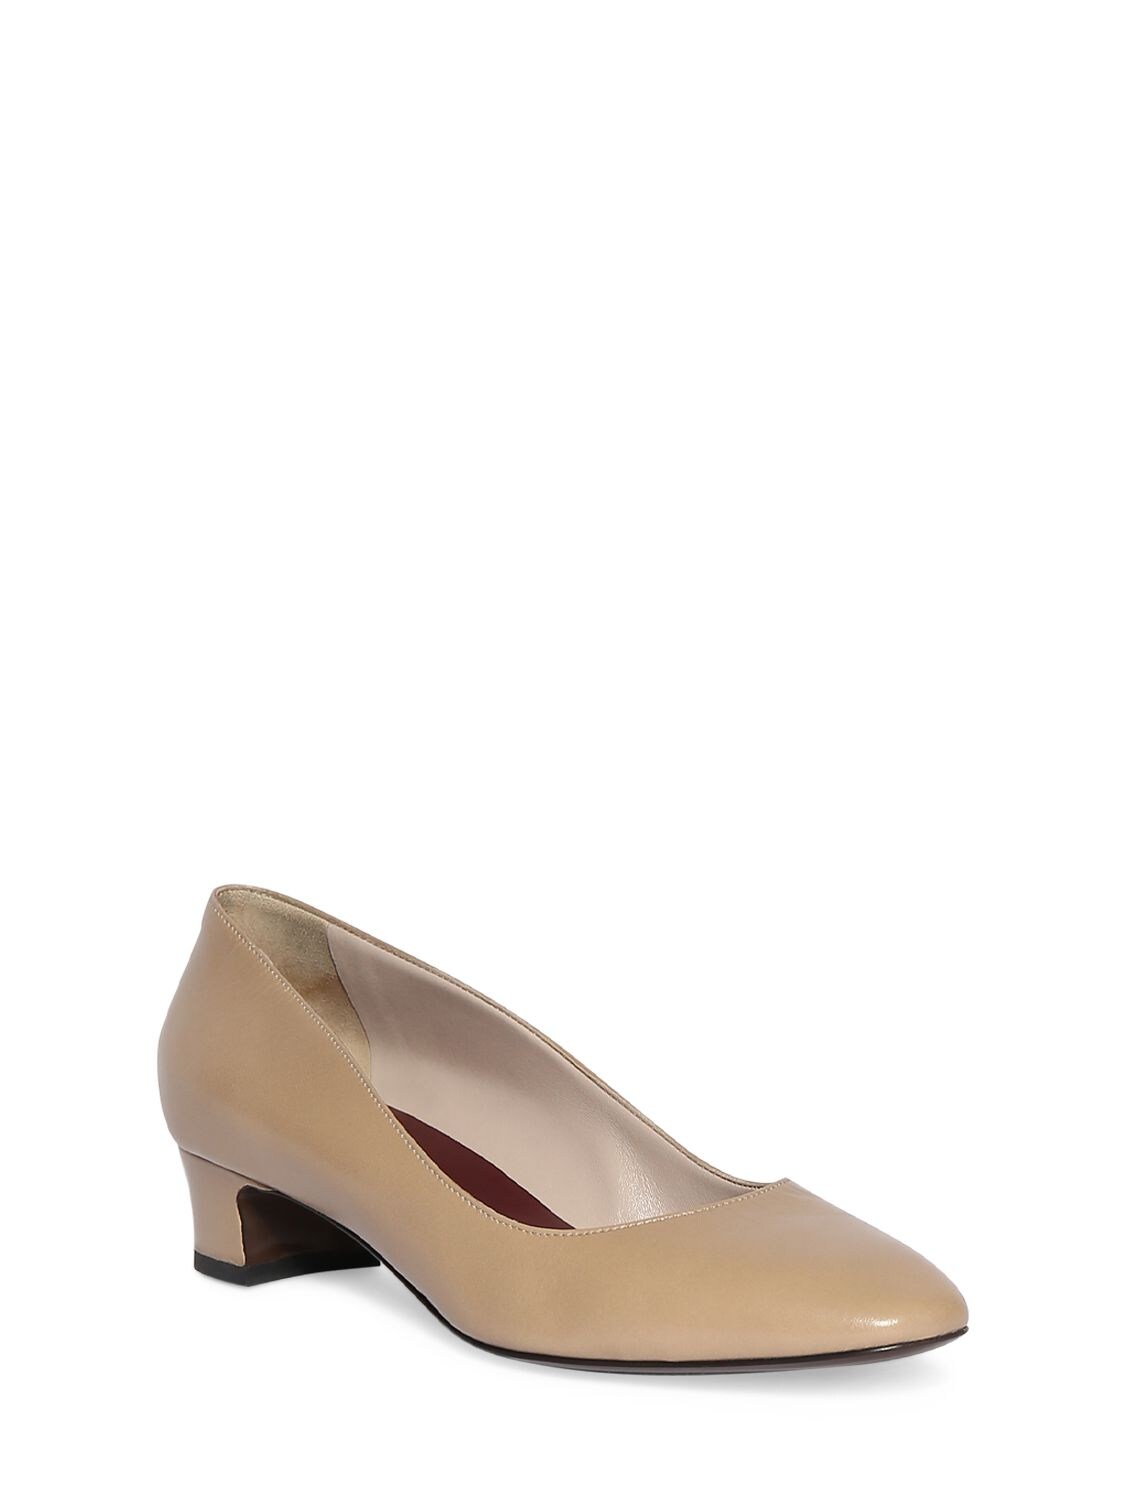 Shop The Row 35mm Luisa Leather Pumps In Cream